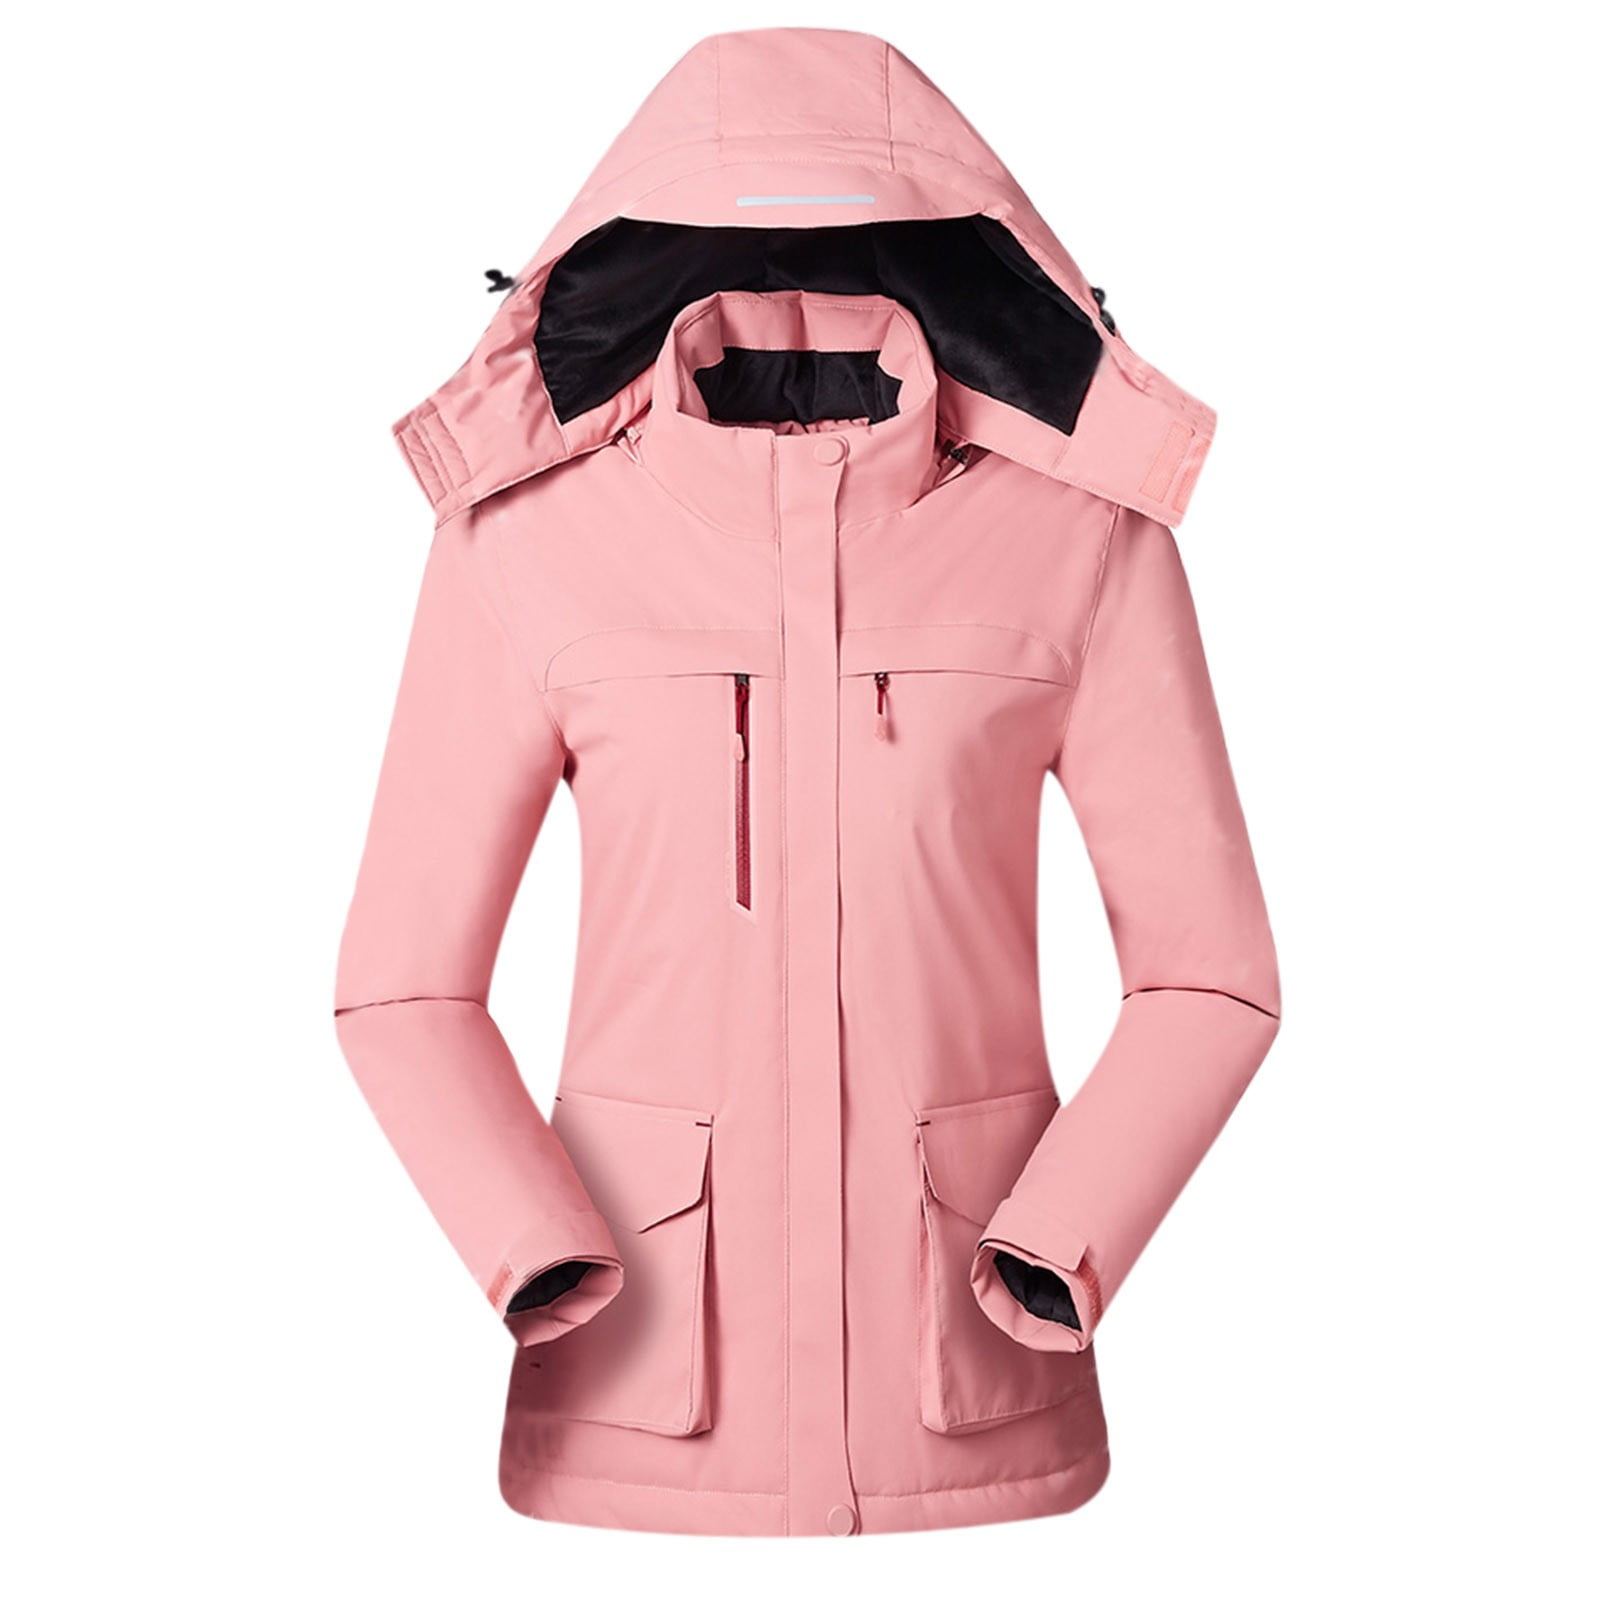 Coat Batteries Not Included Women's Causal Heated Coat with 3 Heating Level 4 Heating Zones Neck Heating Jacket Washable 